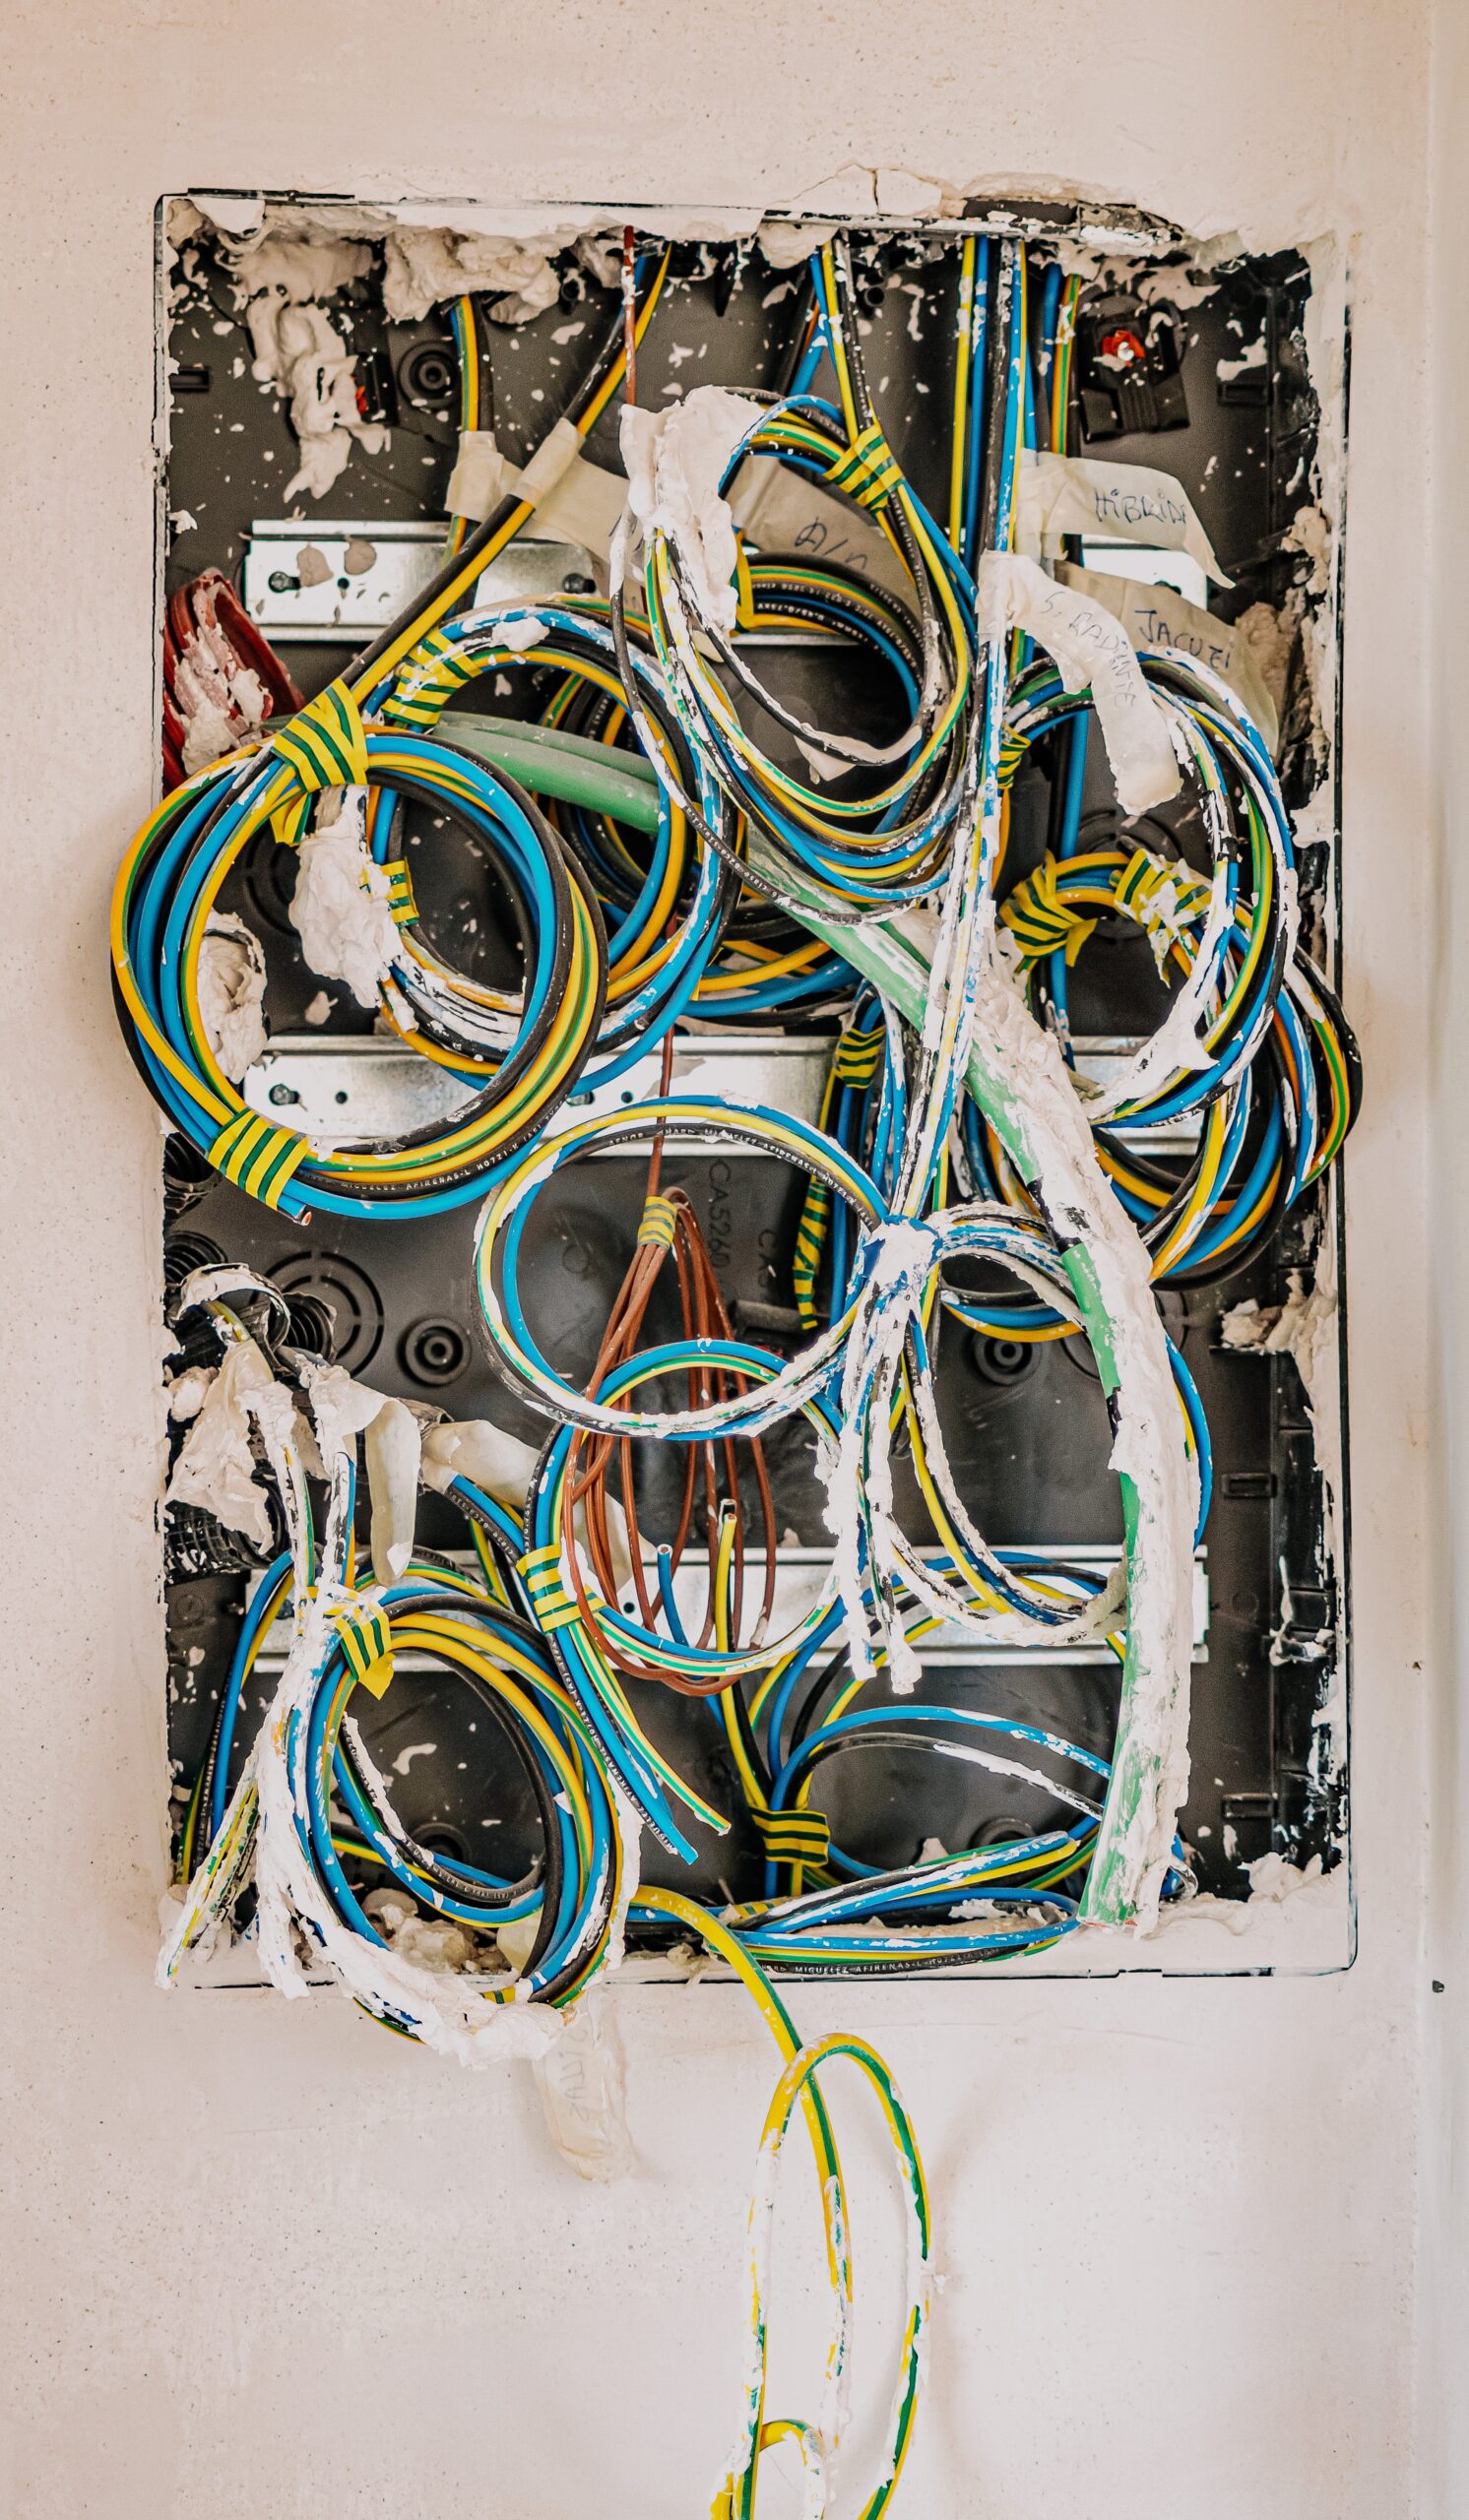 many wires emerging from wall socket